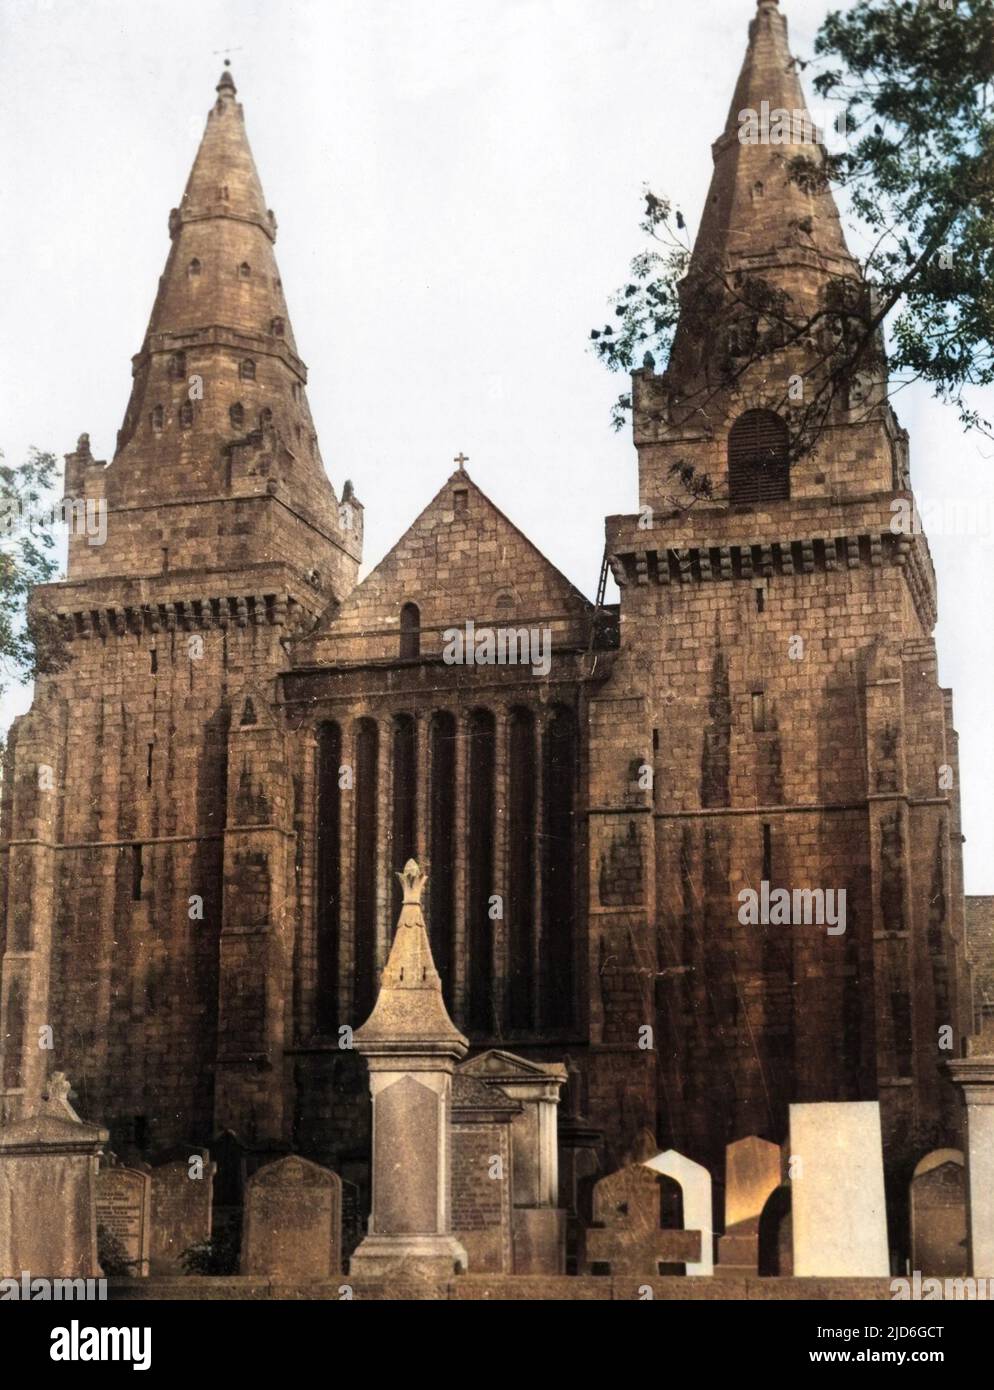 St. Machar's Cathedral. Old Aberdeen, Scotland. These, the two Western towers, were completed by Bishop Henry de Lichtoun between 1423 and 1440. Colourised version of : 10180275       Date: 14th - 16th century Stock Photo